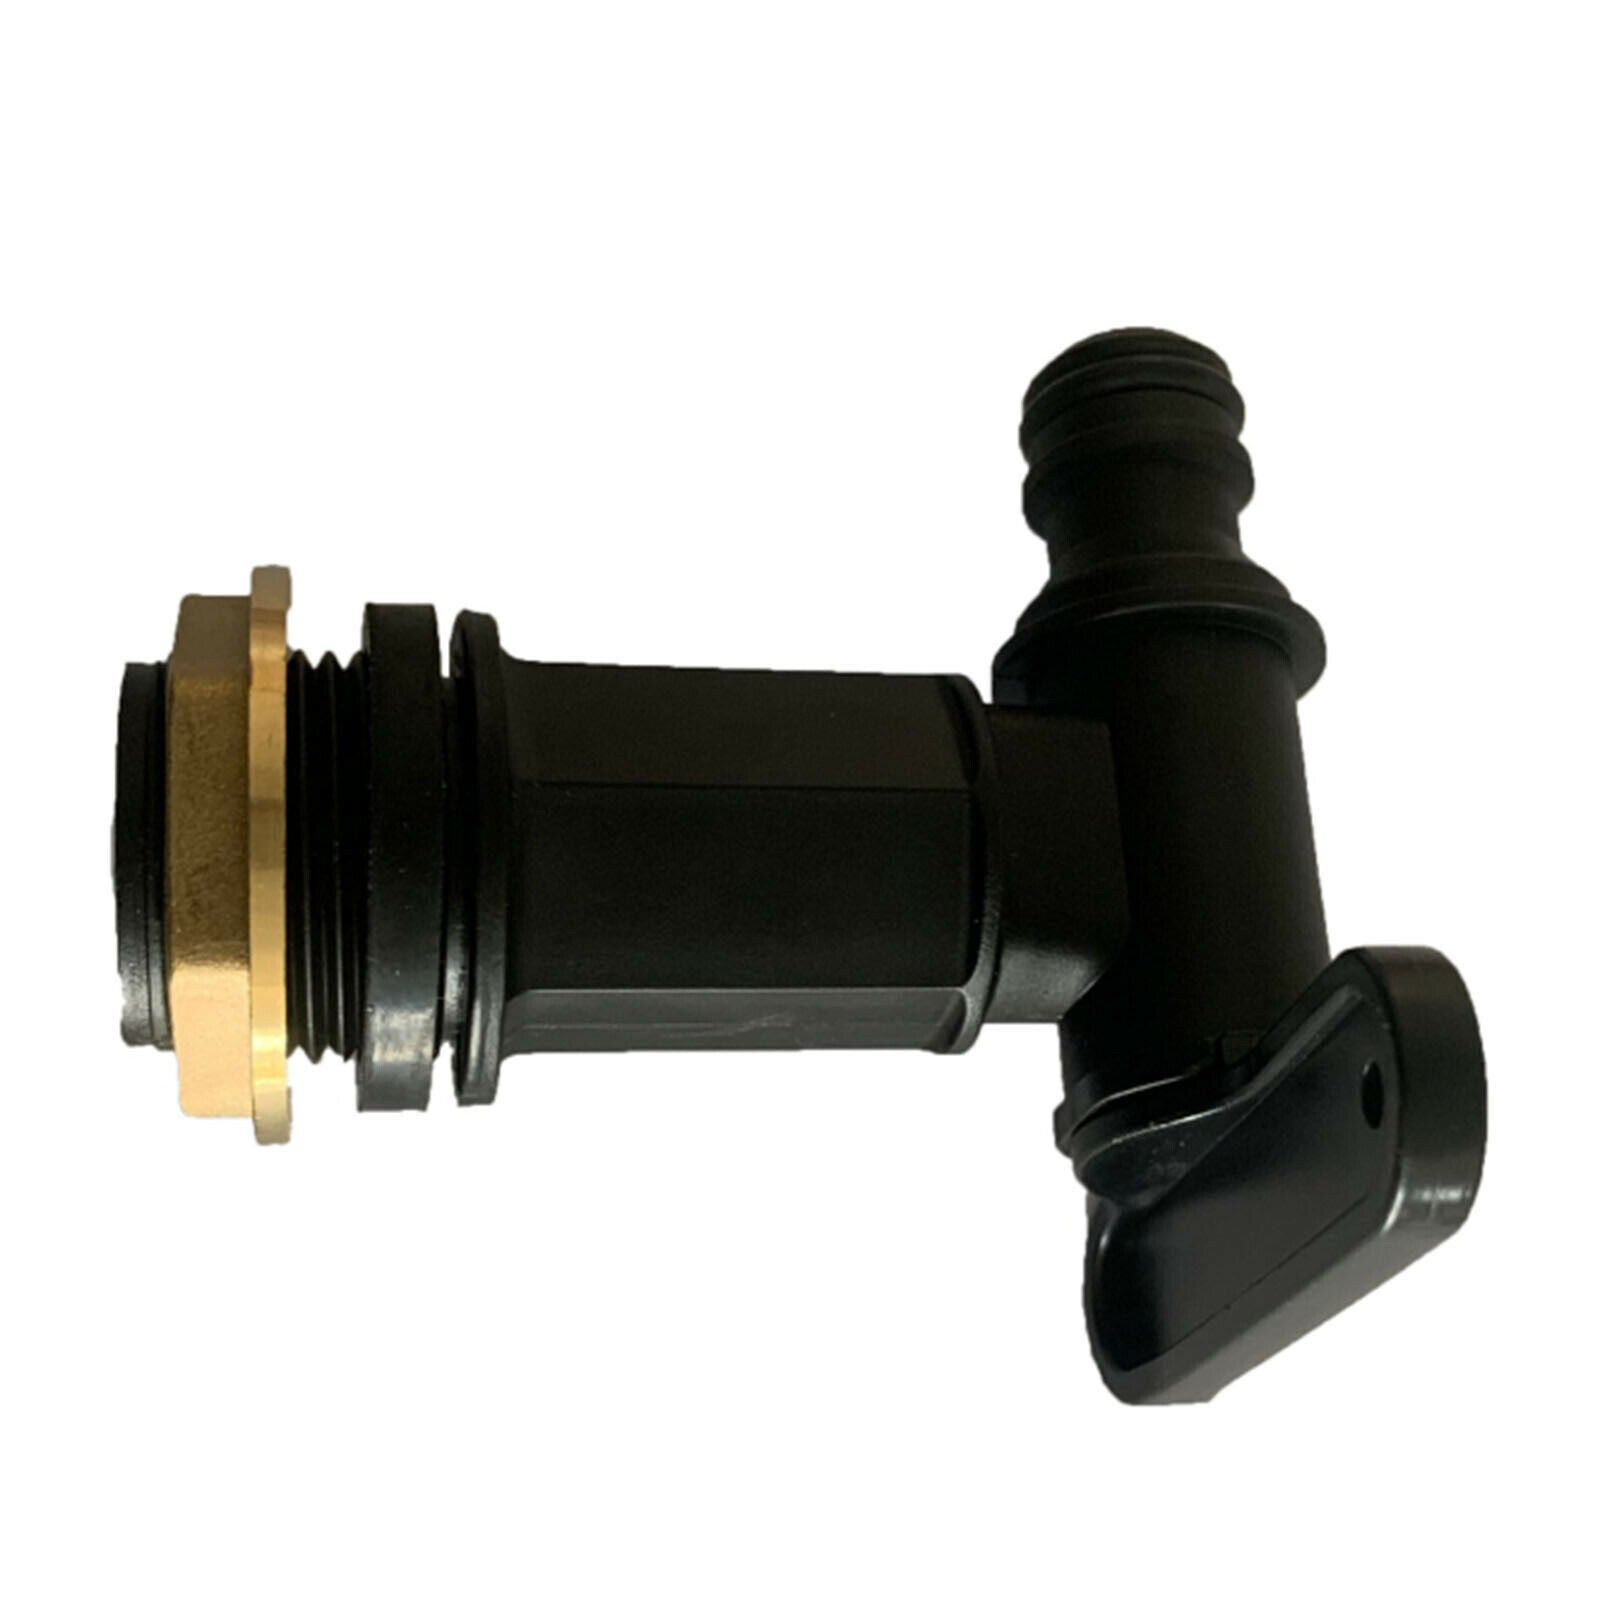 Plastic IBC Tote Tank Drain Adapter 3/4'' Thread Replacement Valve Fitting